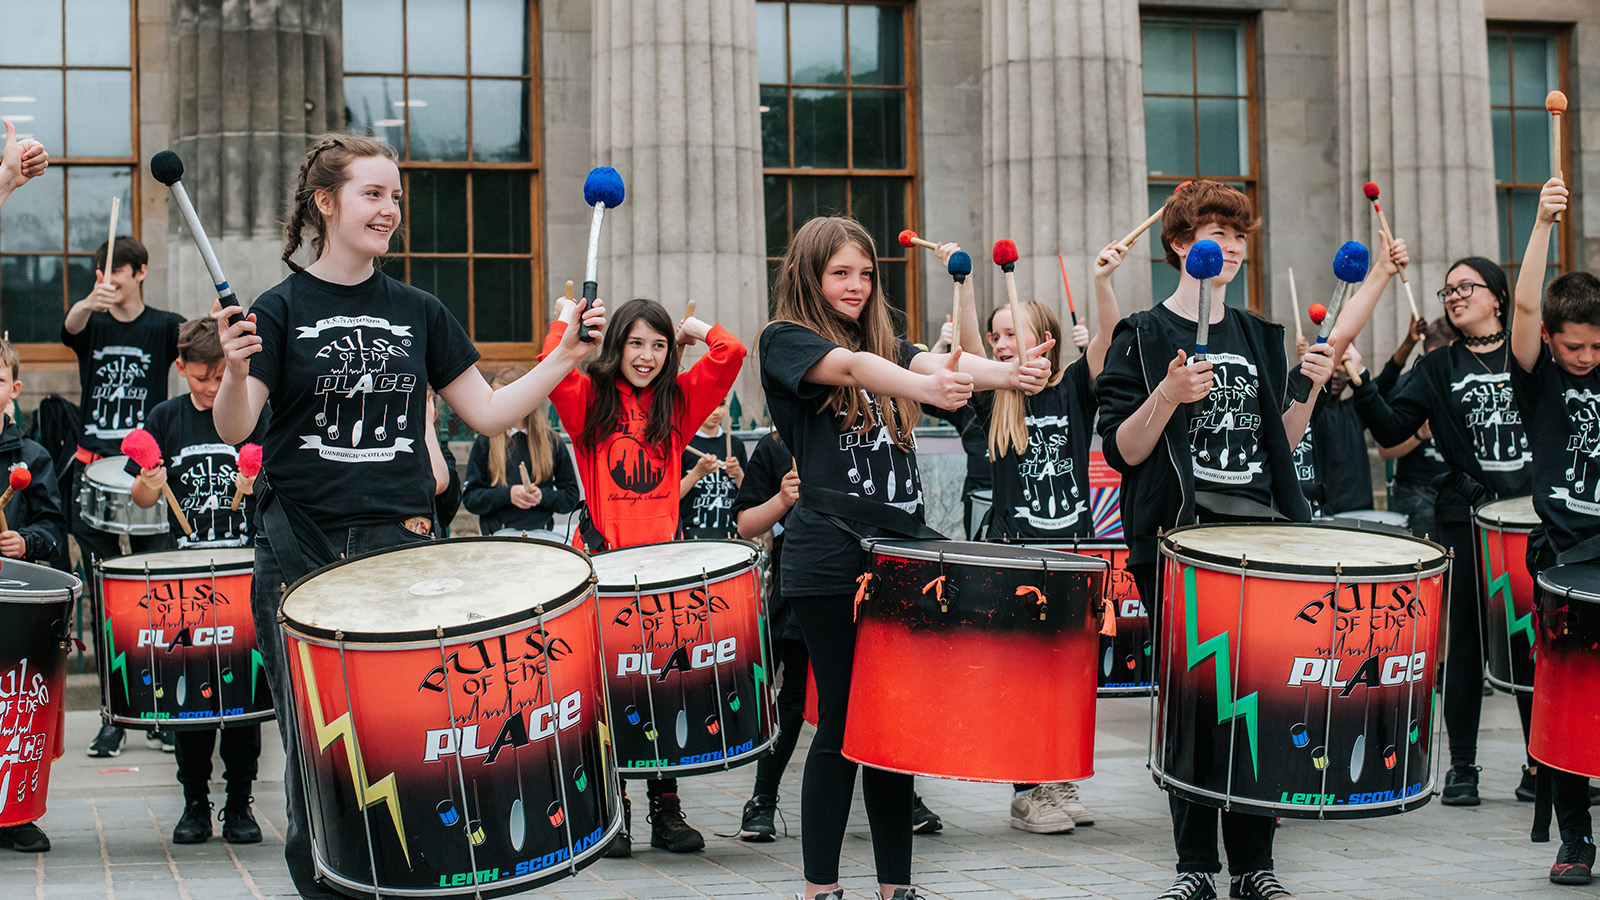 A large group of young people form a band of drummers as they play for audiences outside in Edinburgh